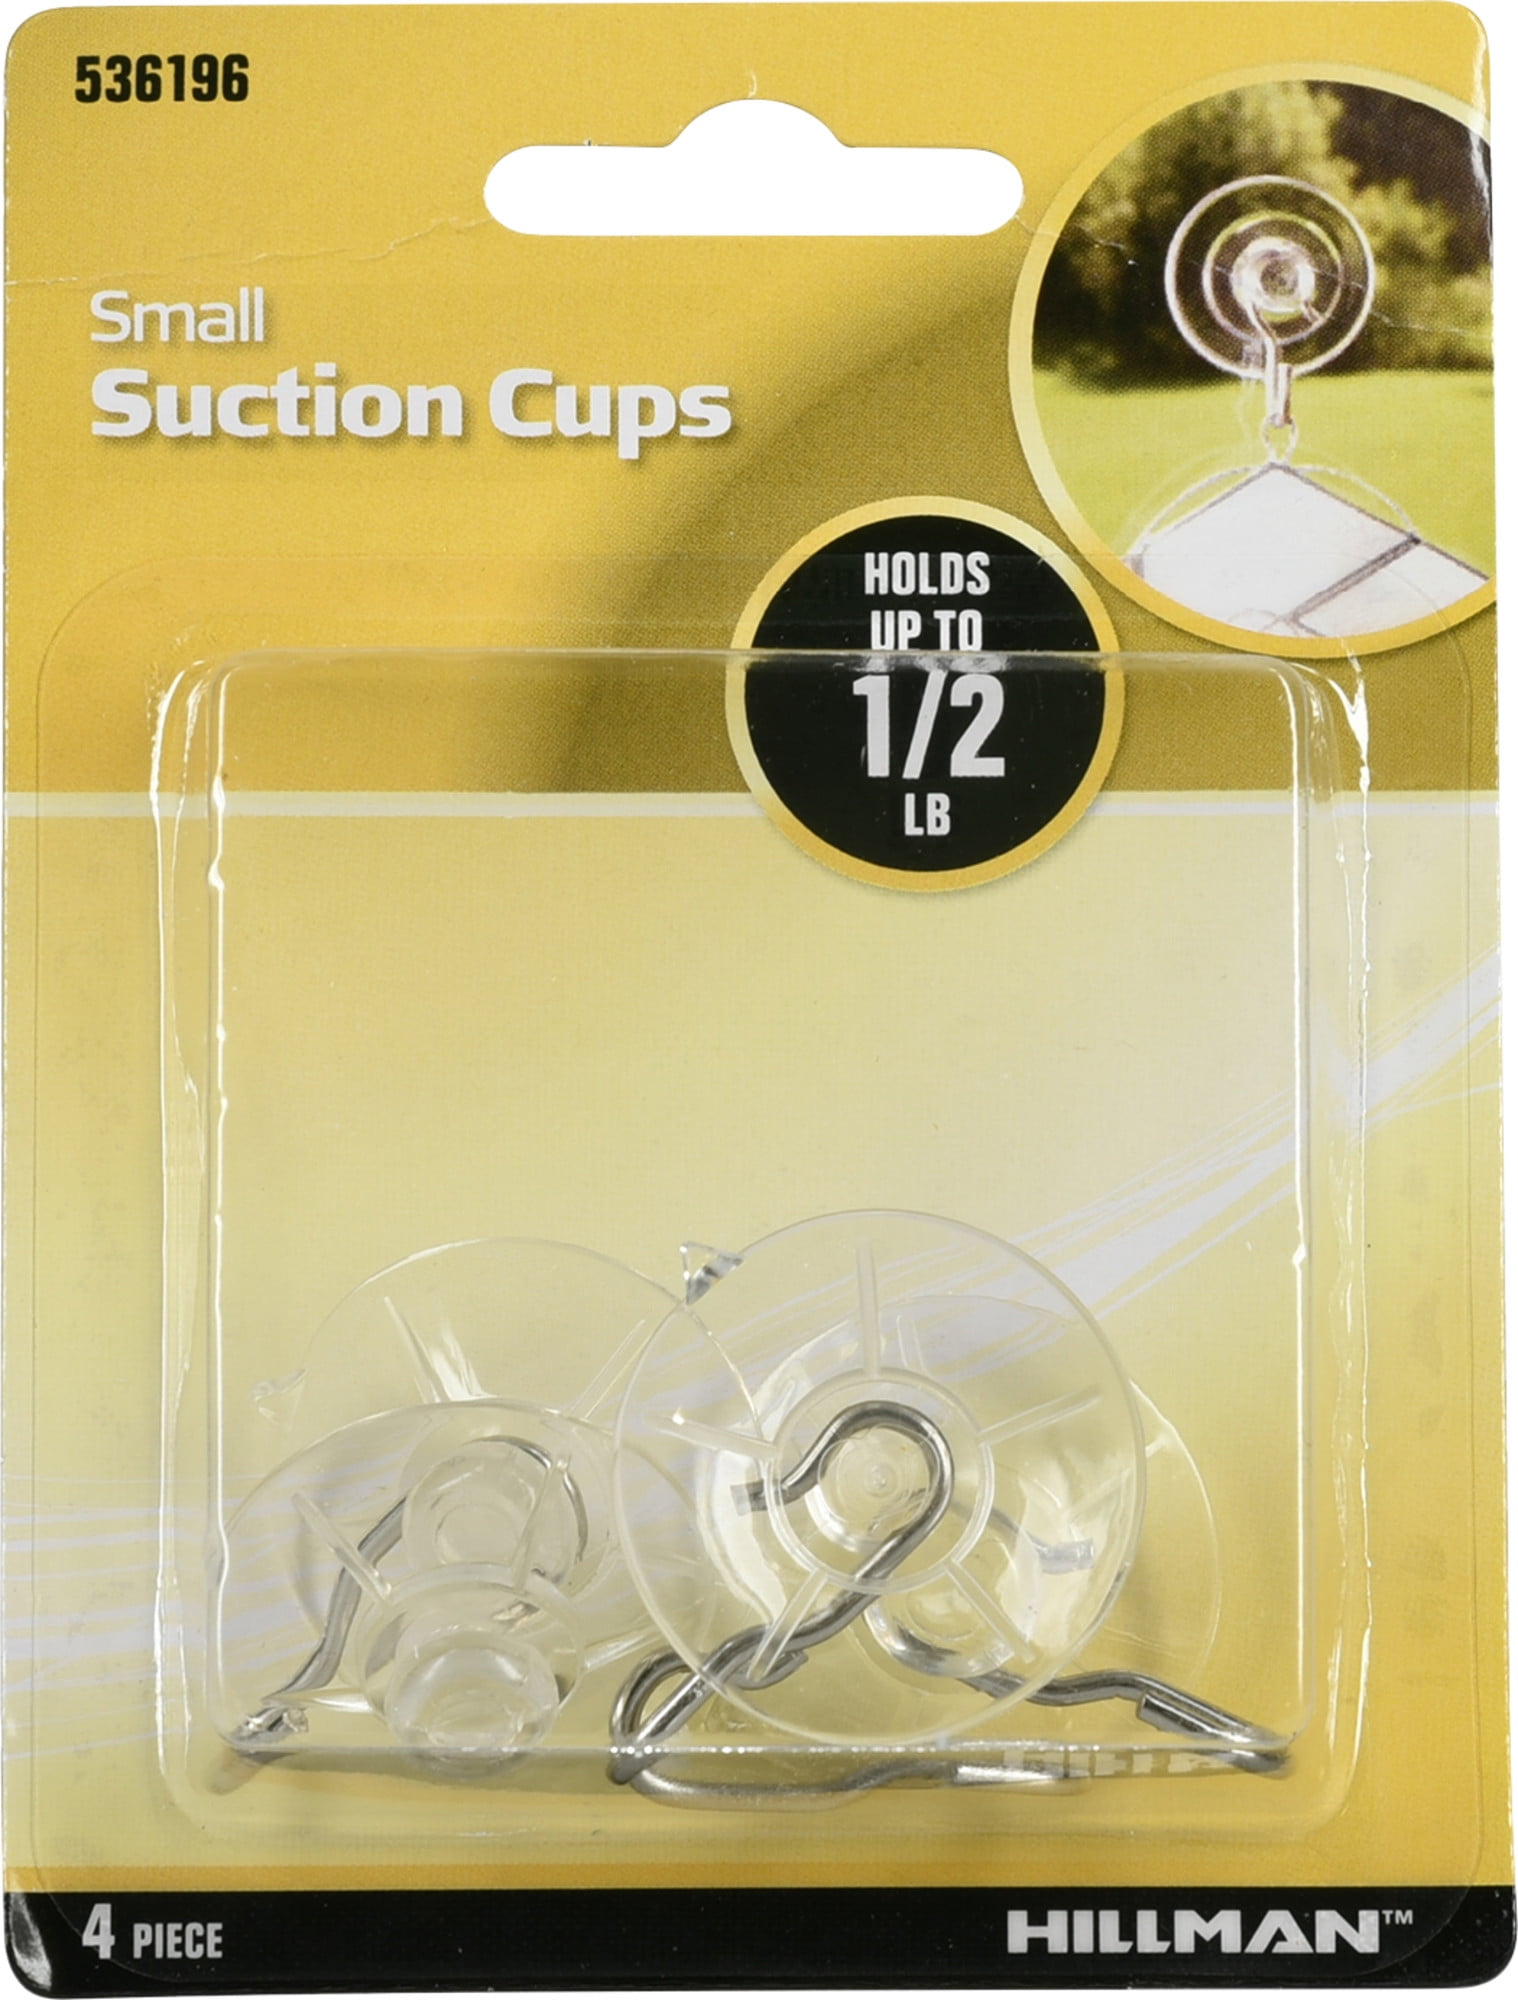 Hillman 536196 Small Suction Cup Hooks (1/2lb) 4 Pack 